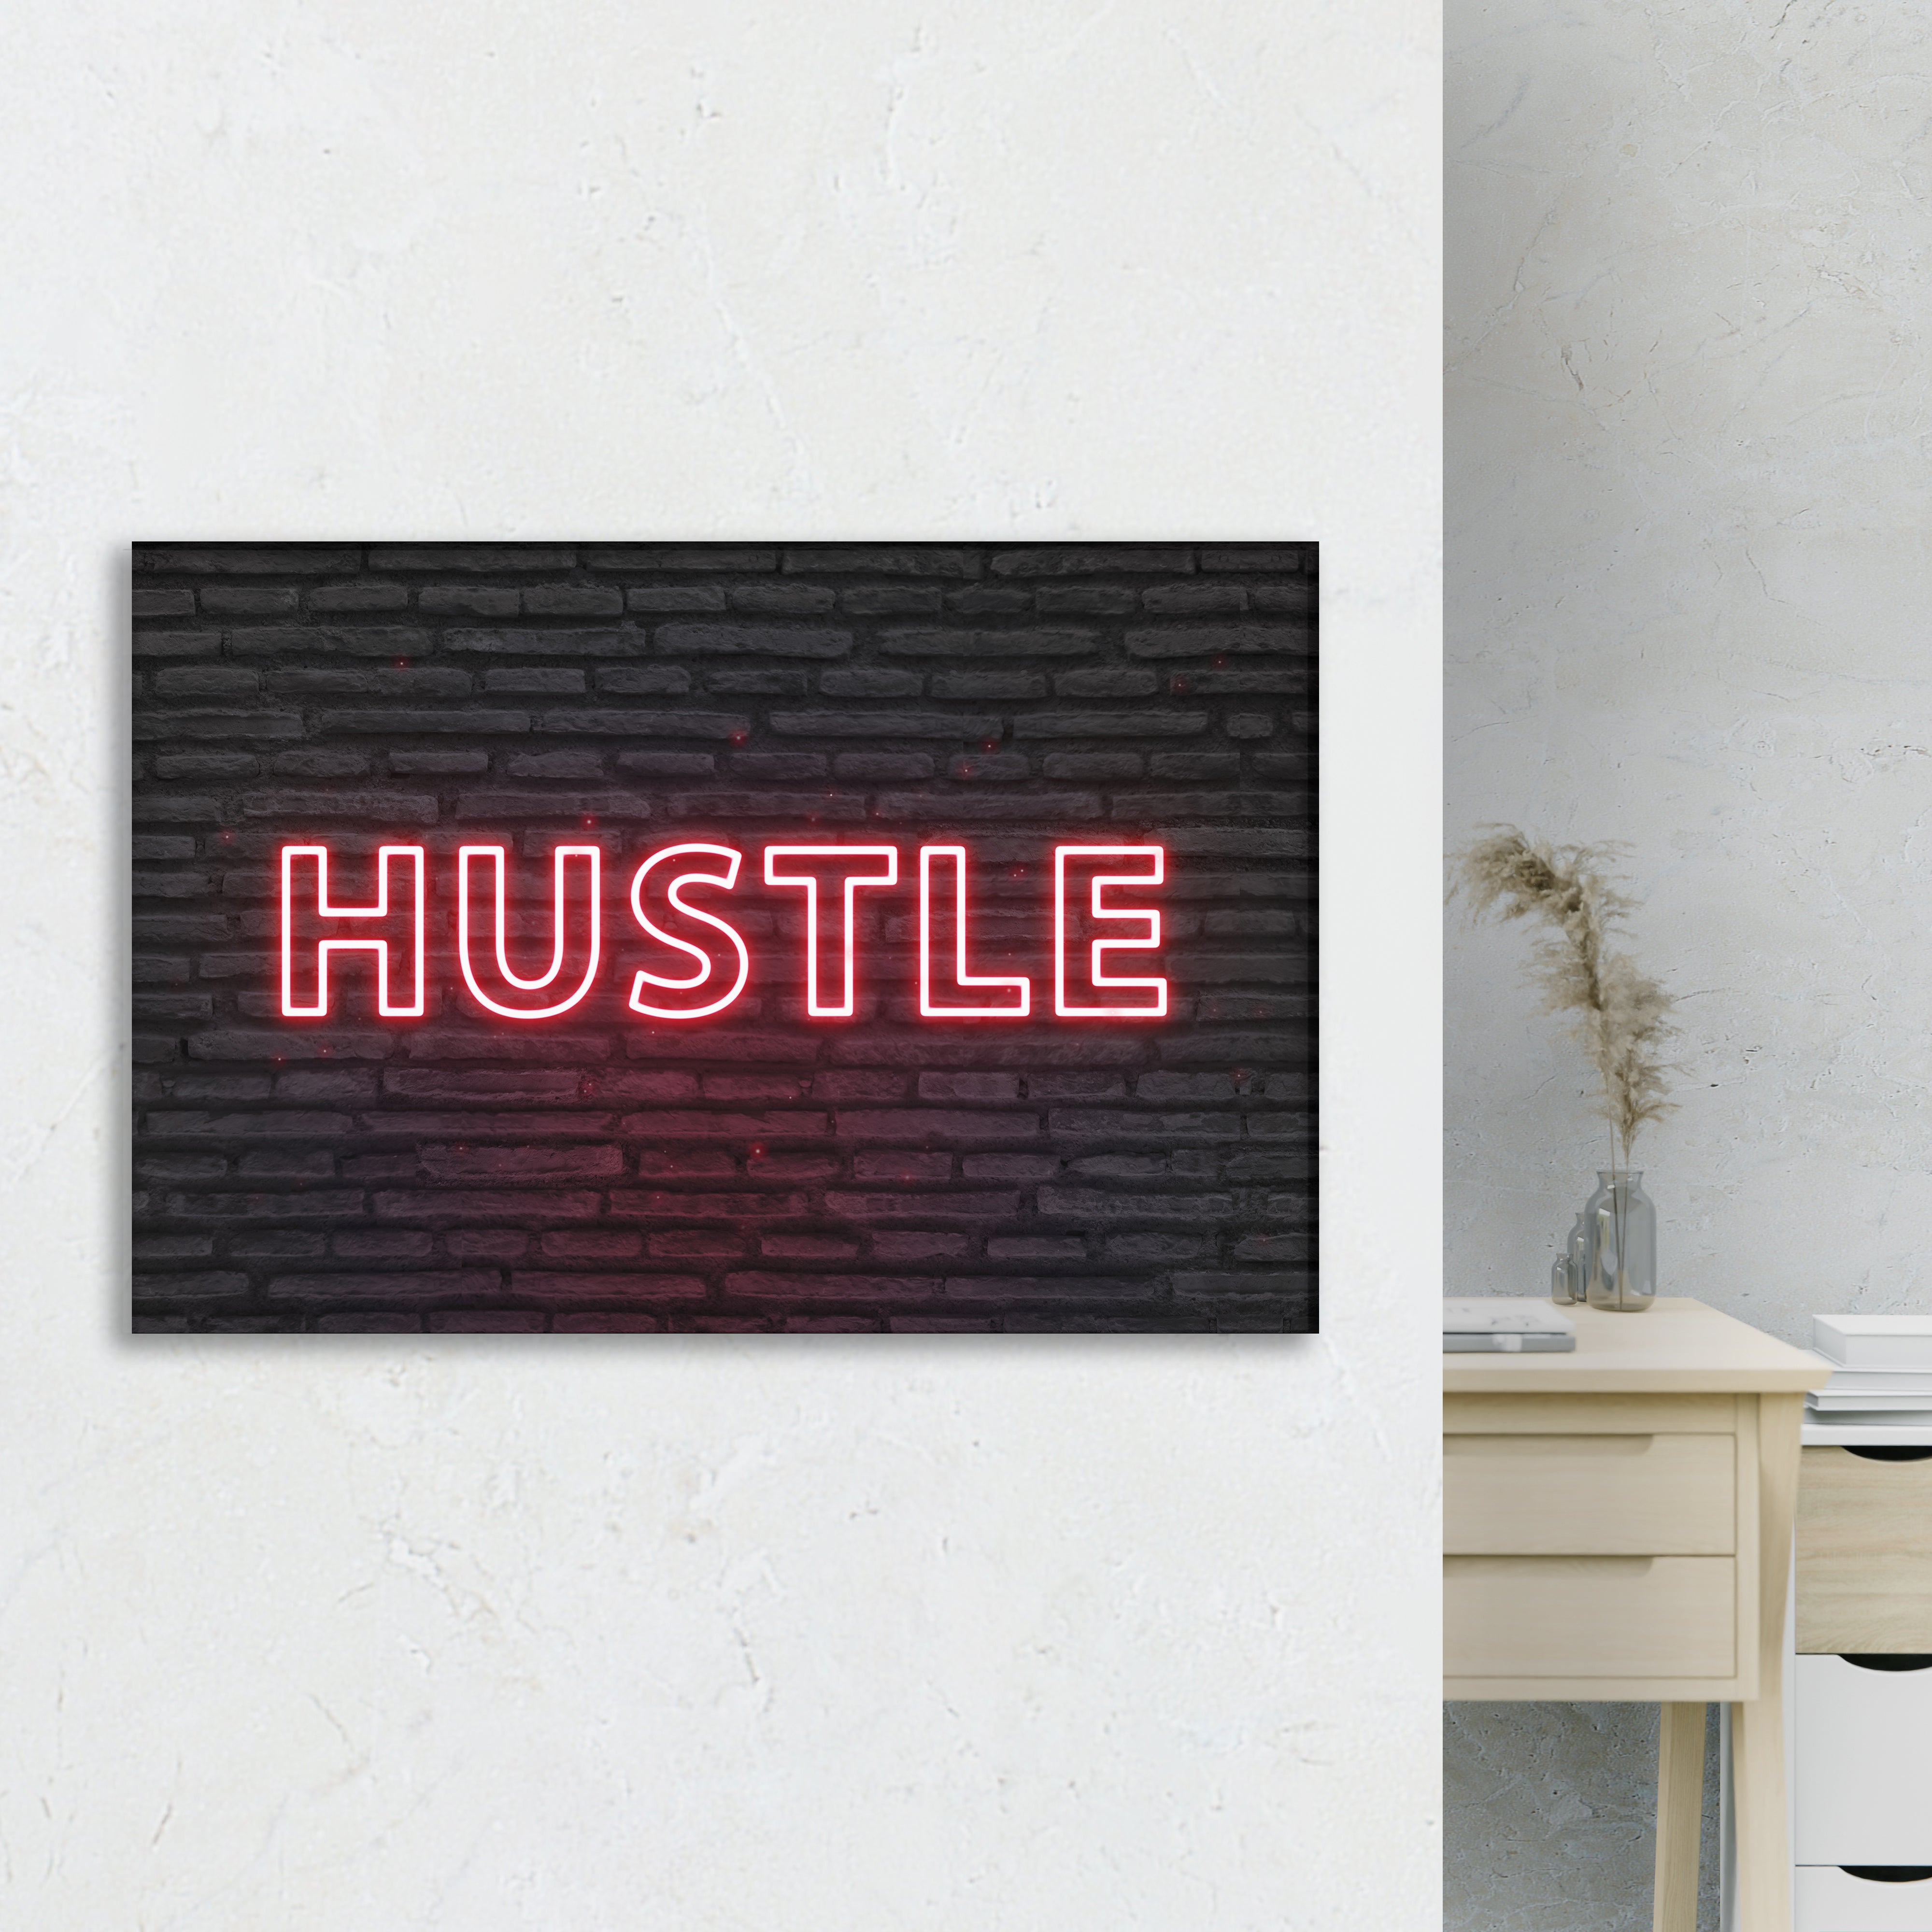 Hu for Hustle - Motivational Quotes.